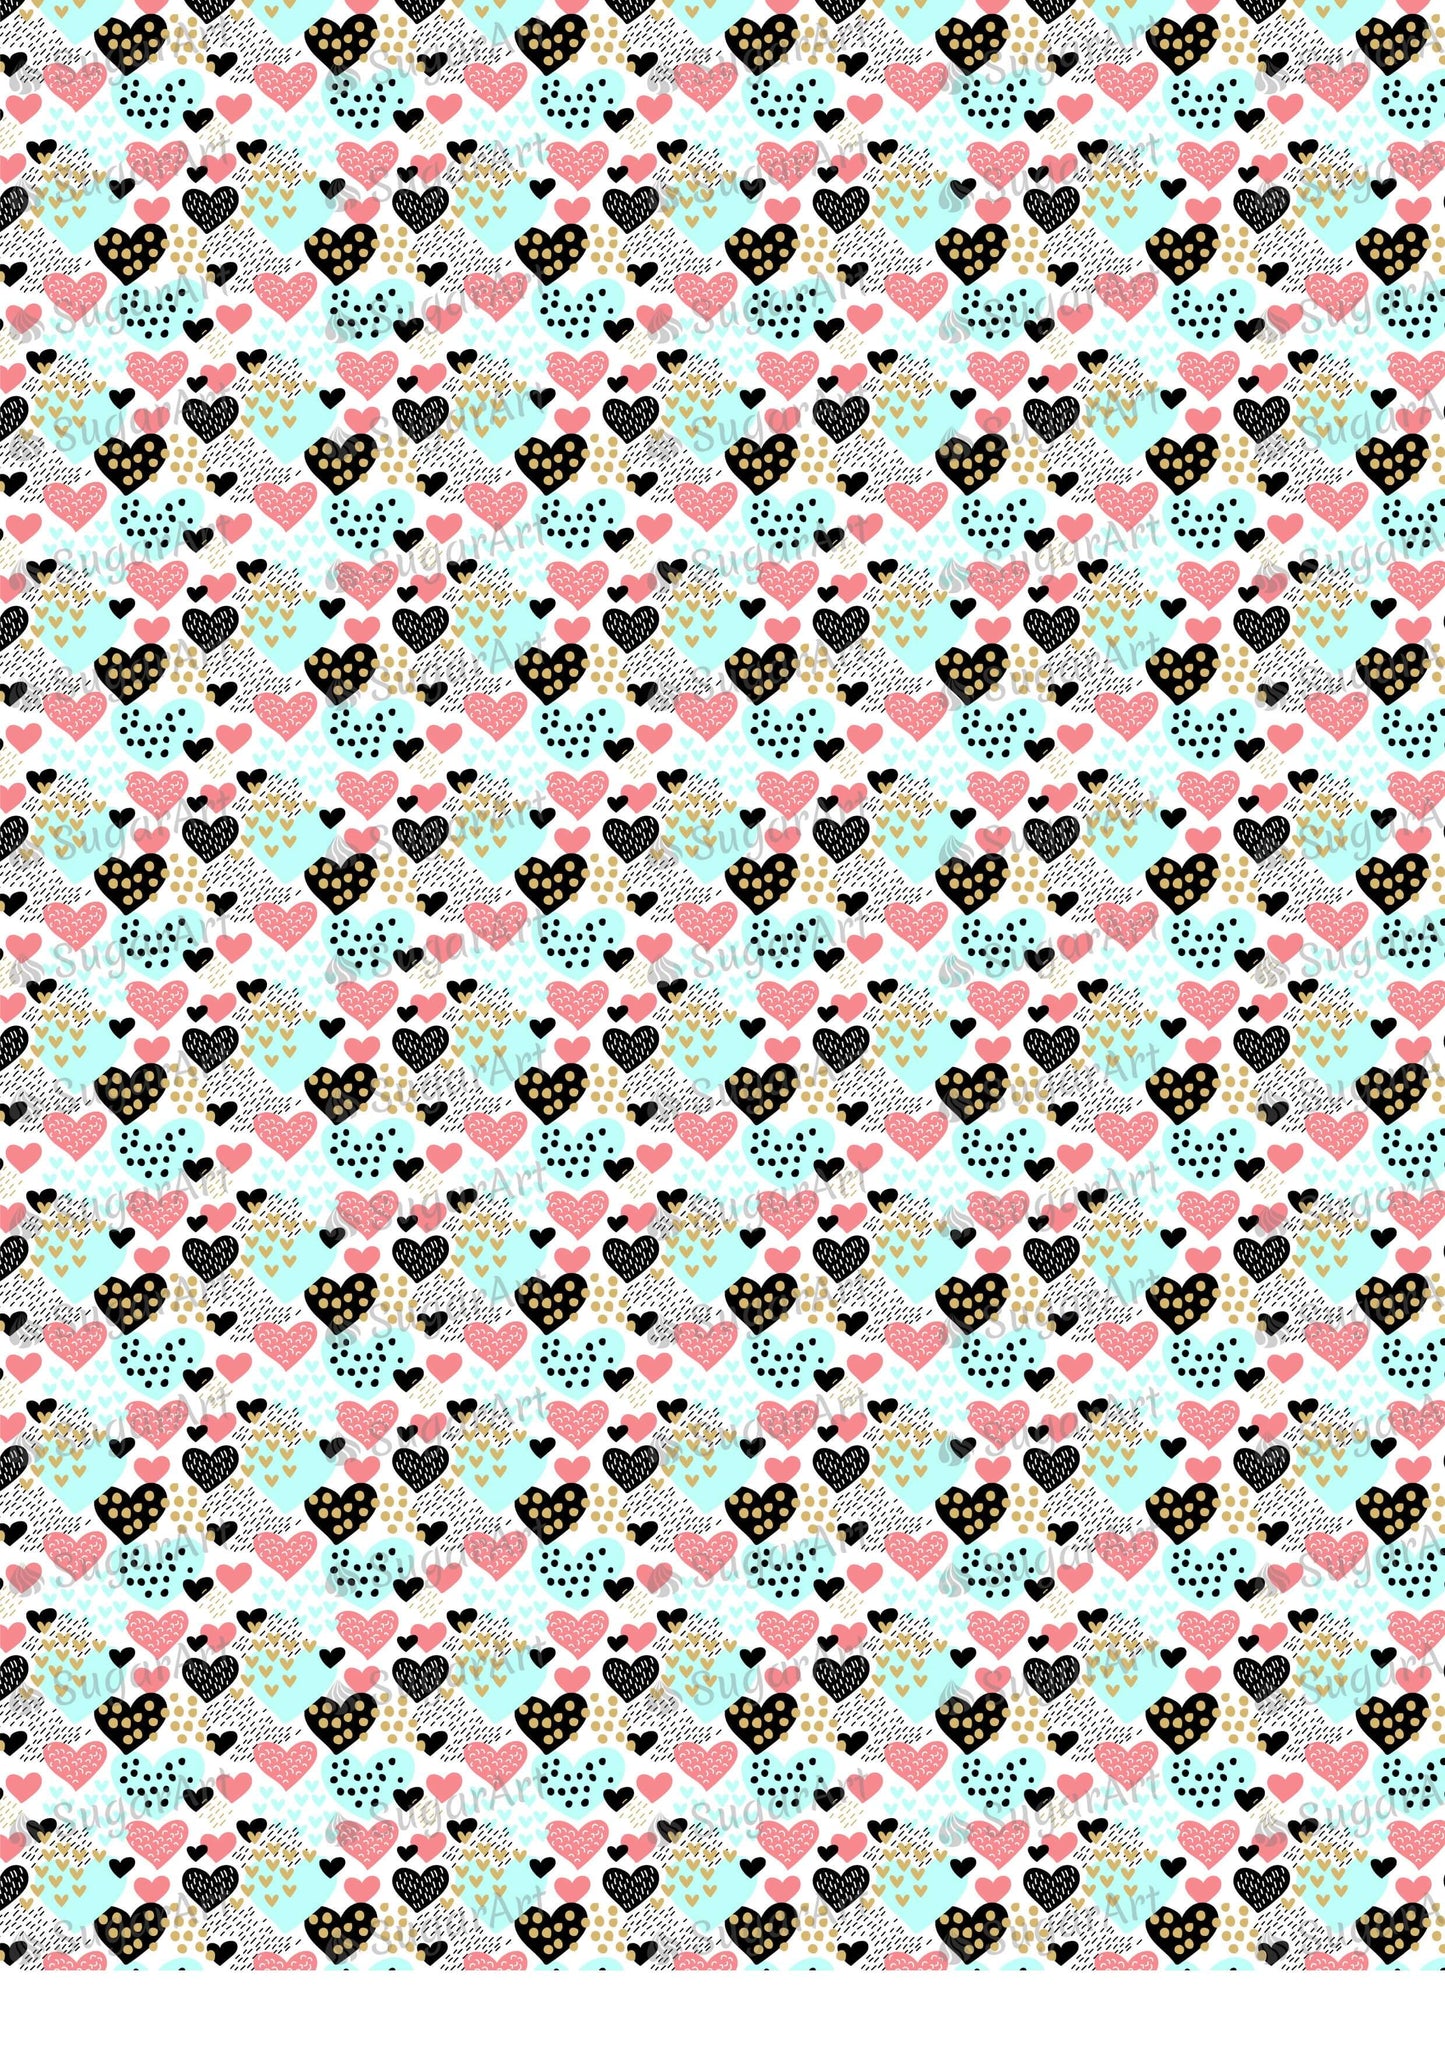 Hearts and Dots background - BSA046.